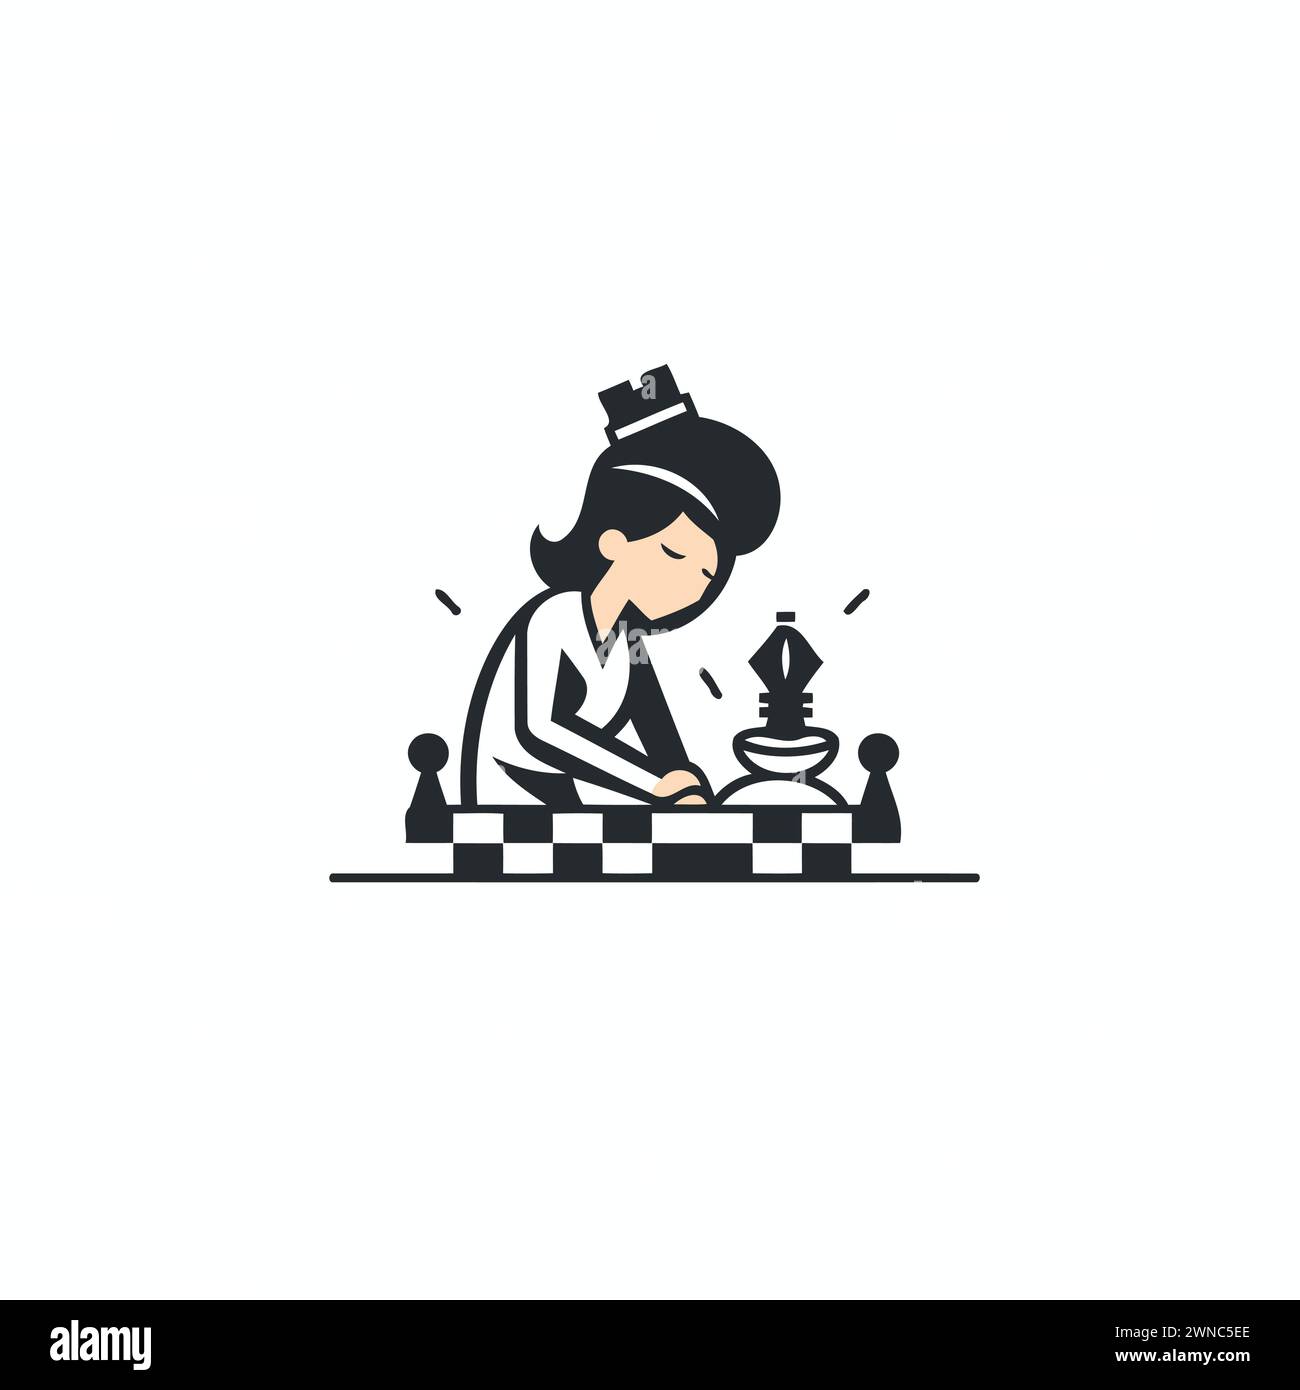 Chess king icon in simple style on a white background vector illustration Stock Vector